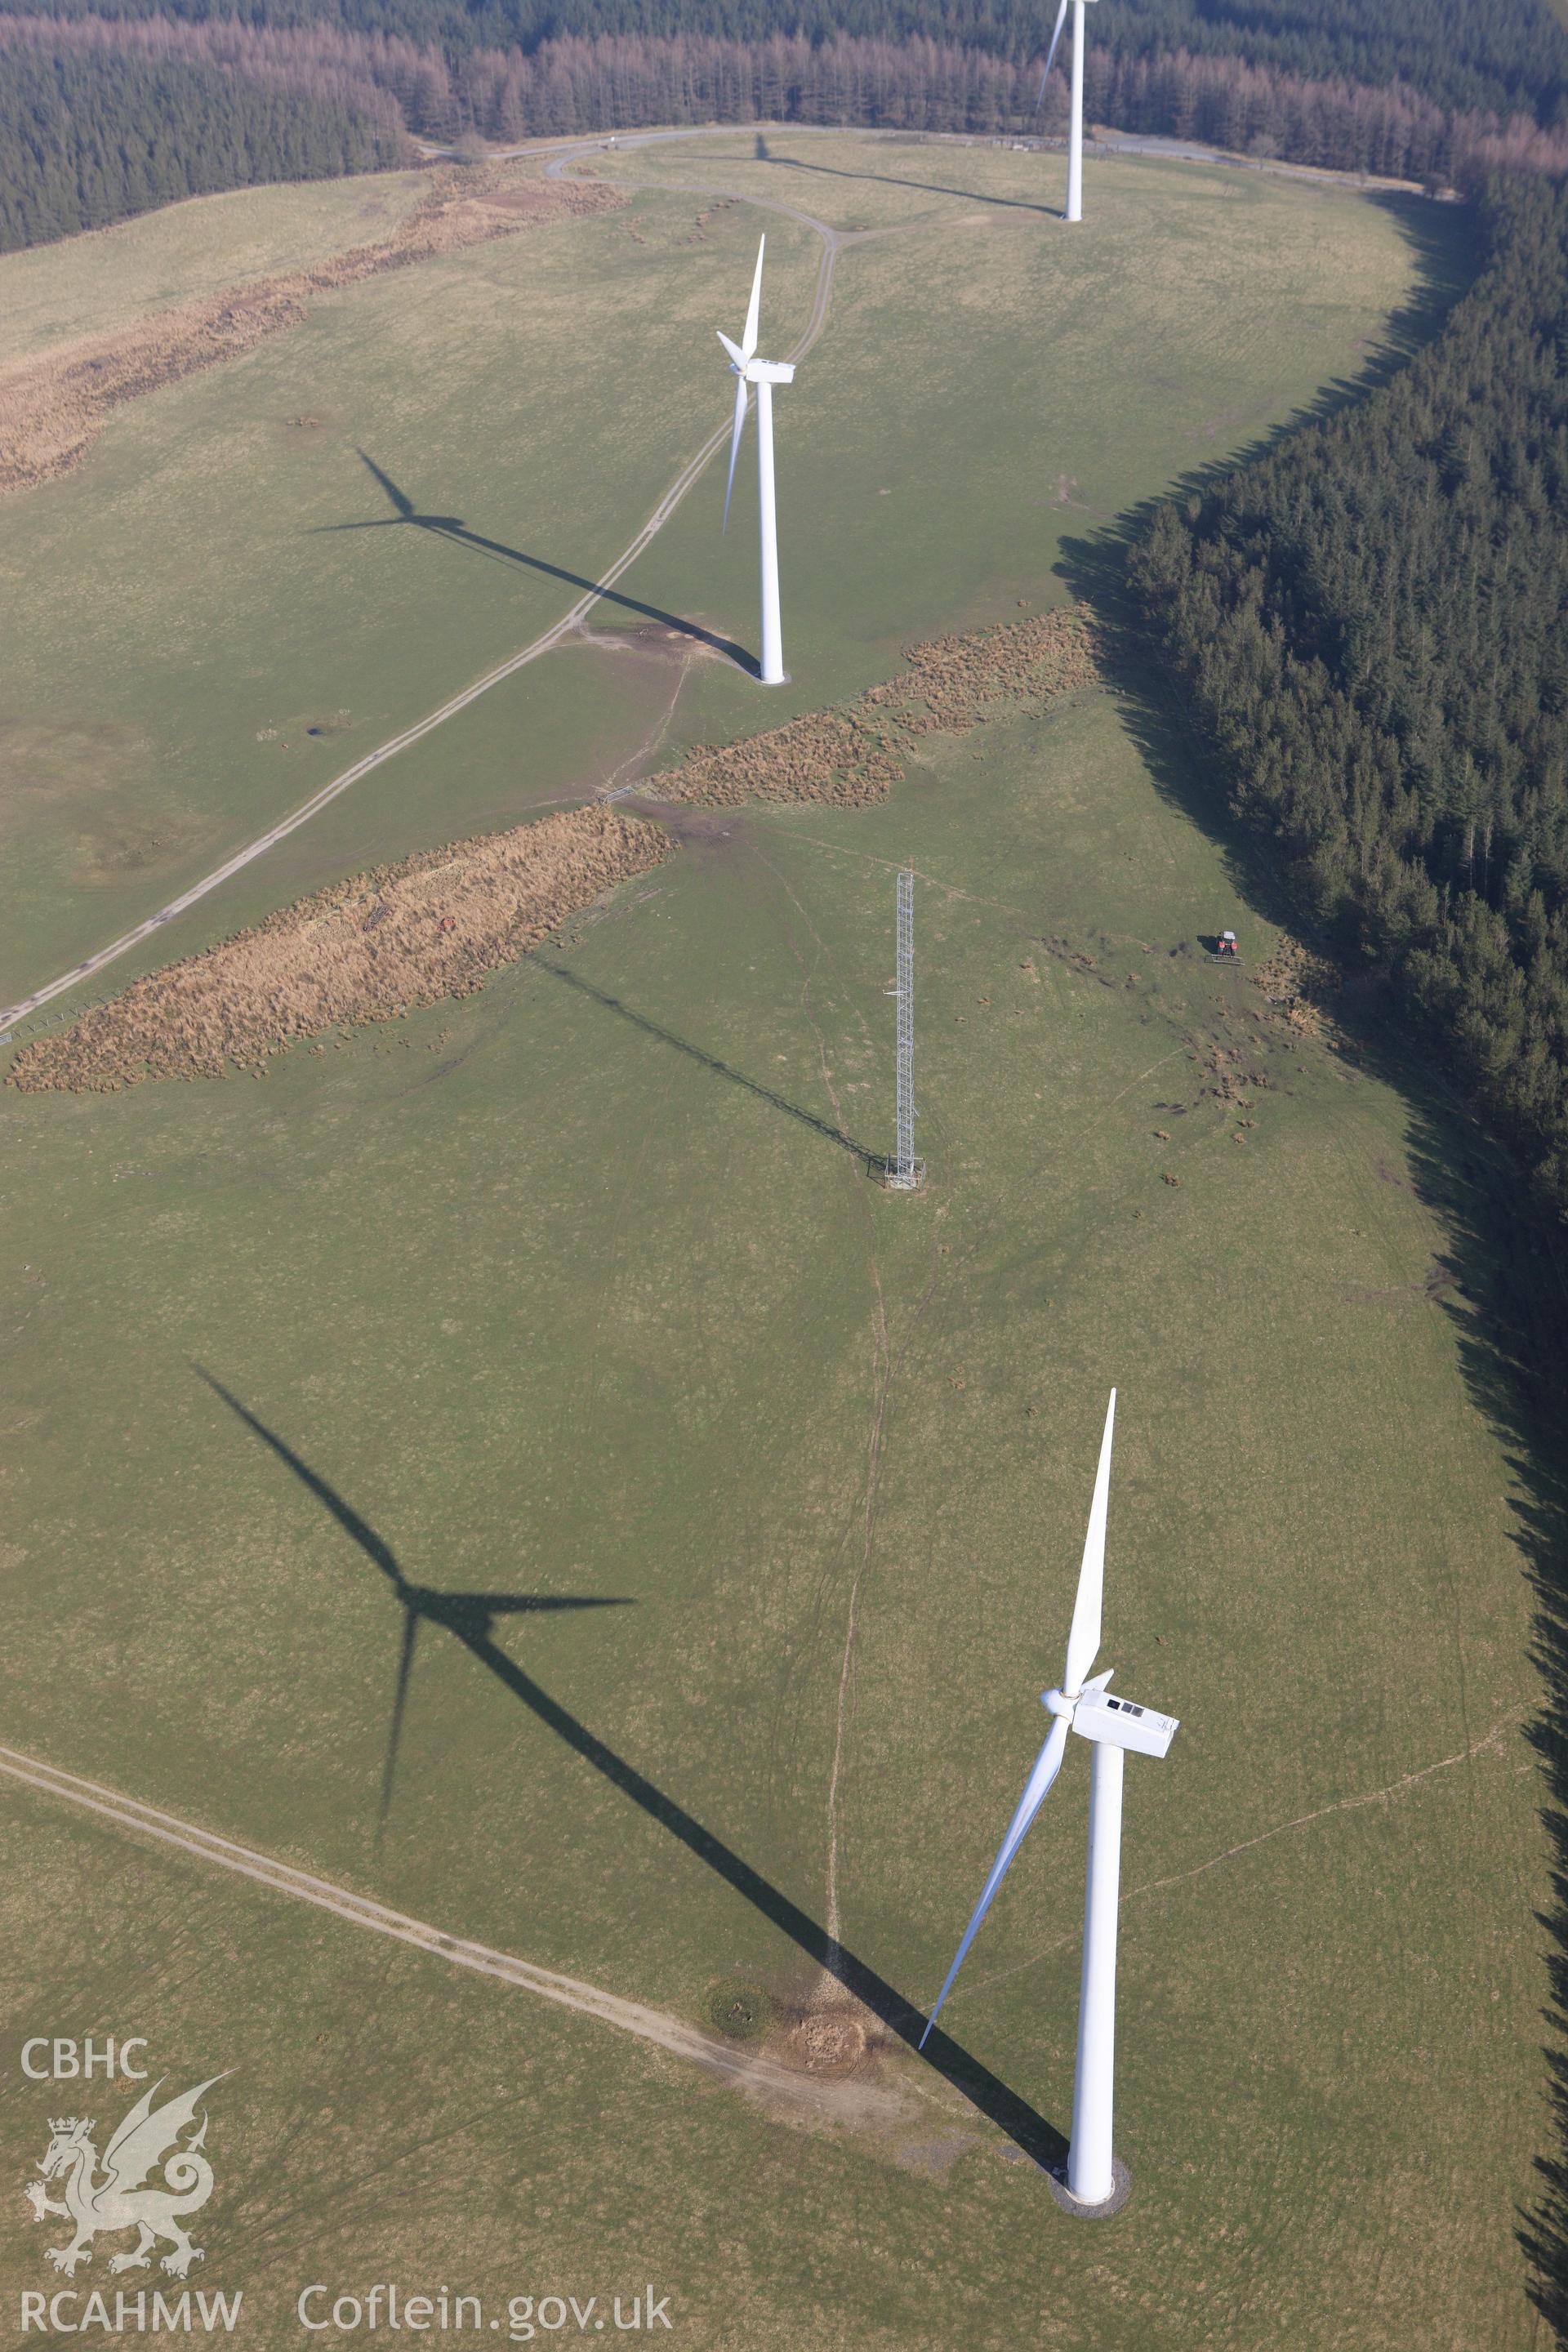 RCAHMW colour oblique photograph of Tir Mostyn wind farm. Taken by Toby Driver on 18/03/2009.